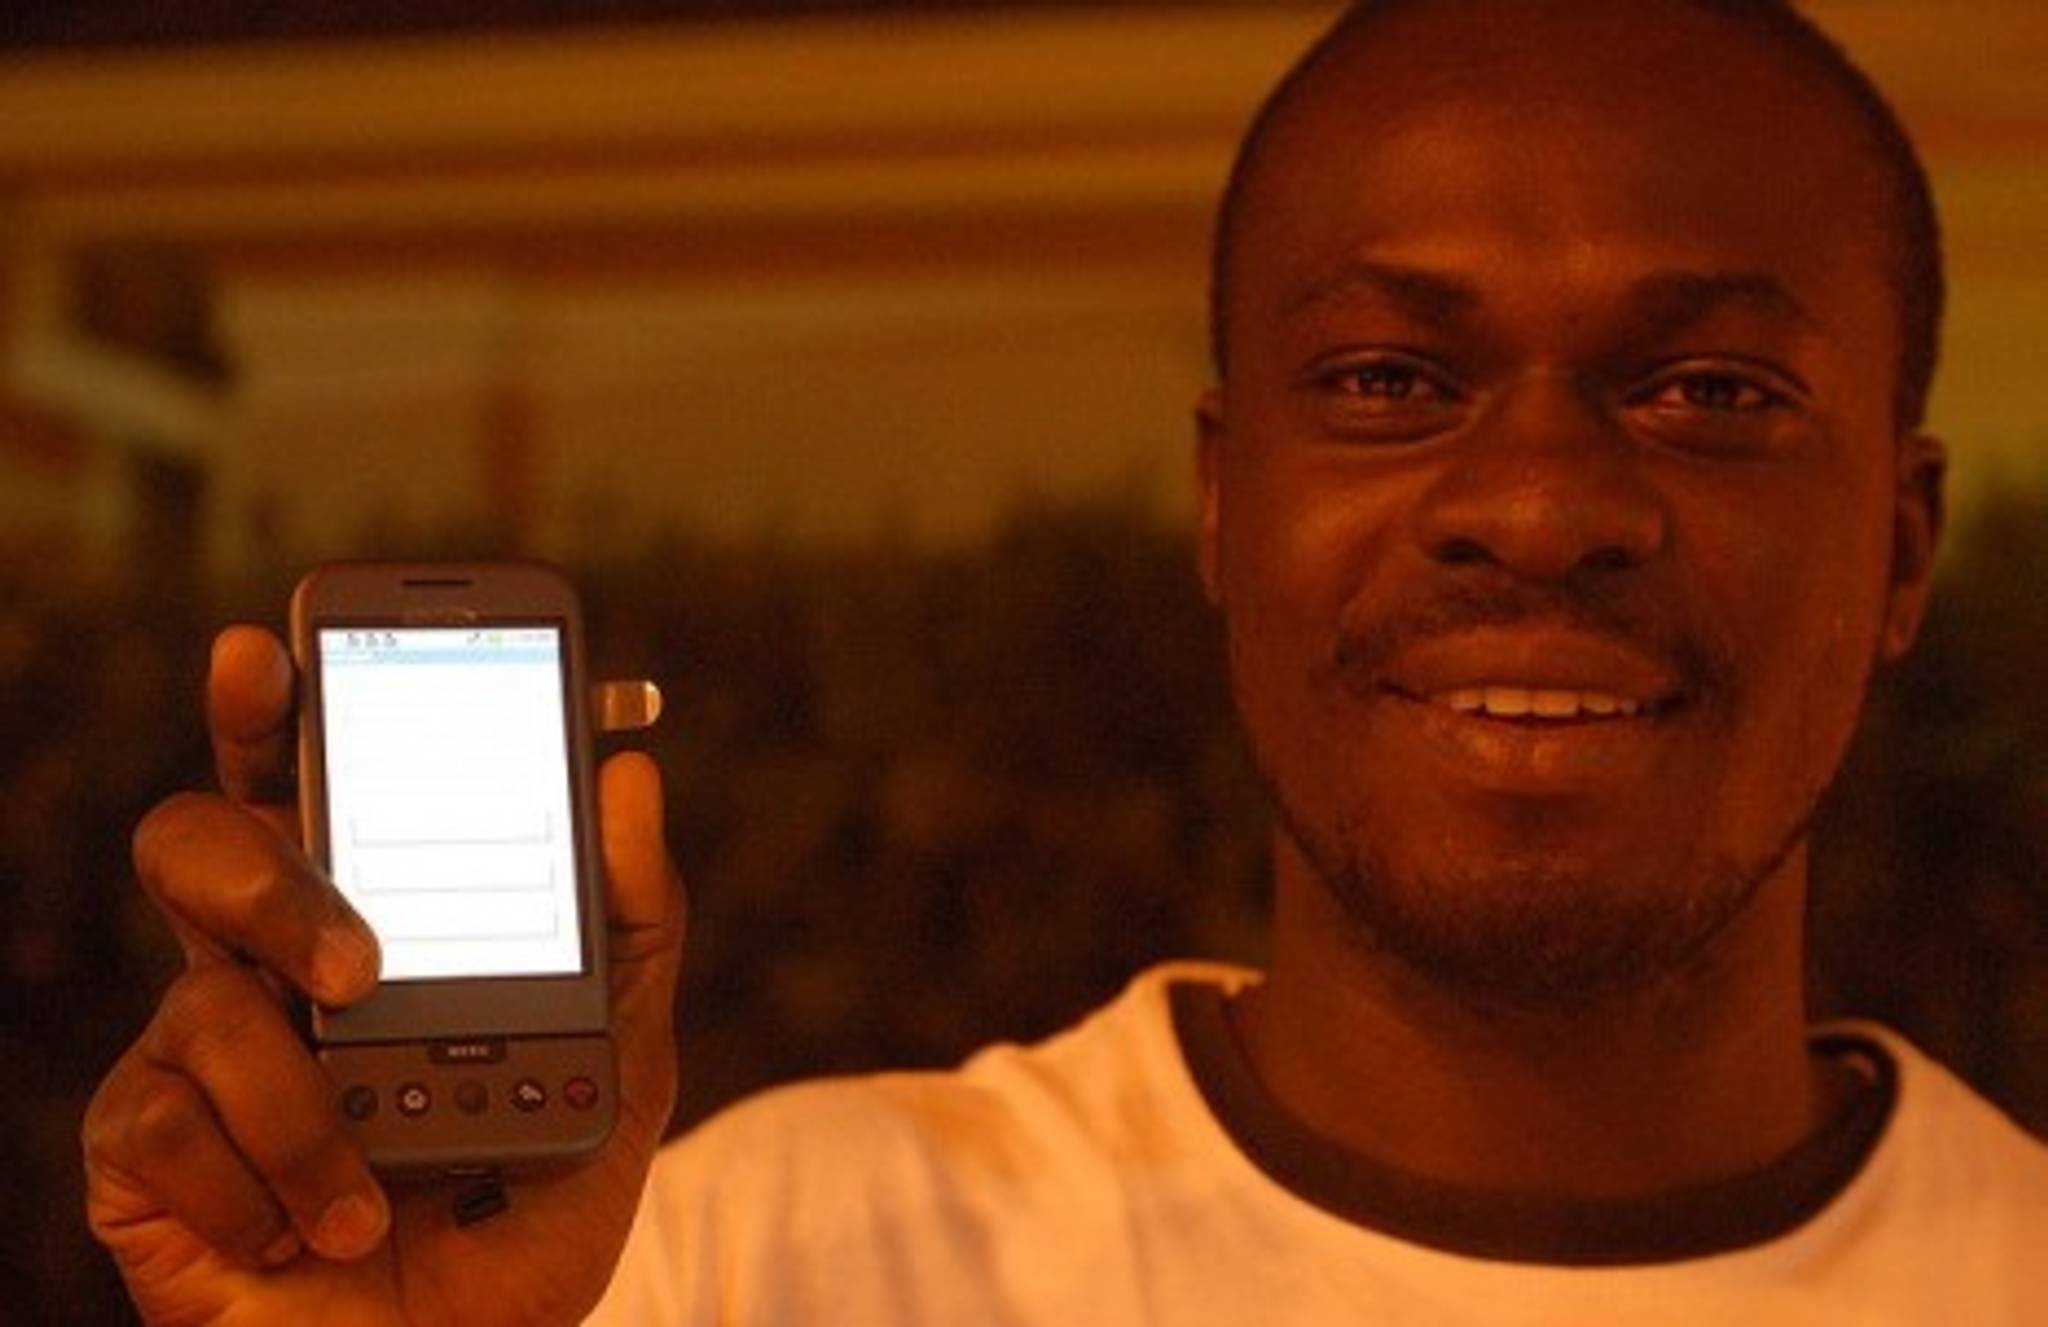 'Made for Africa' mobile health app